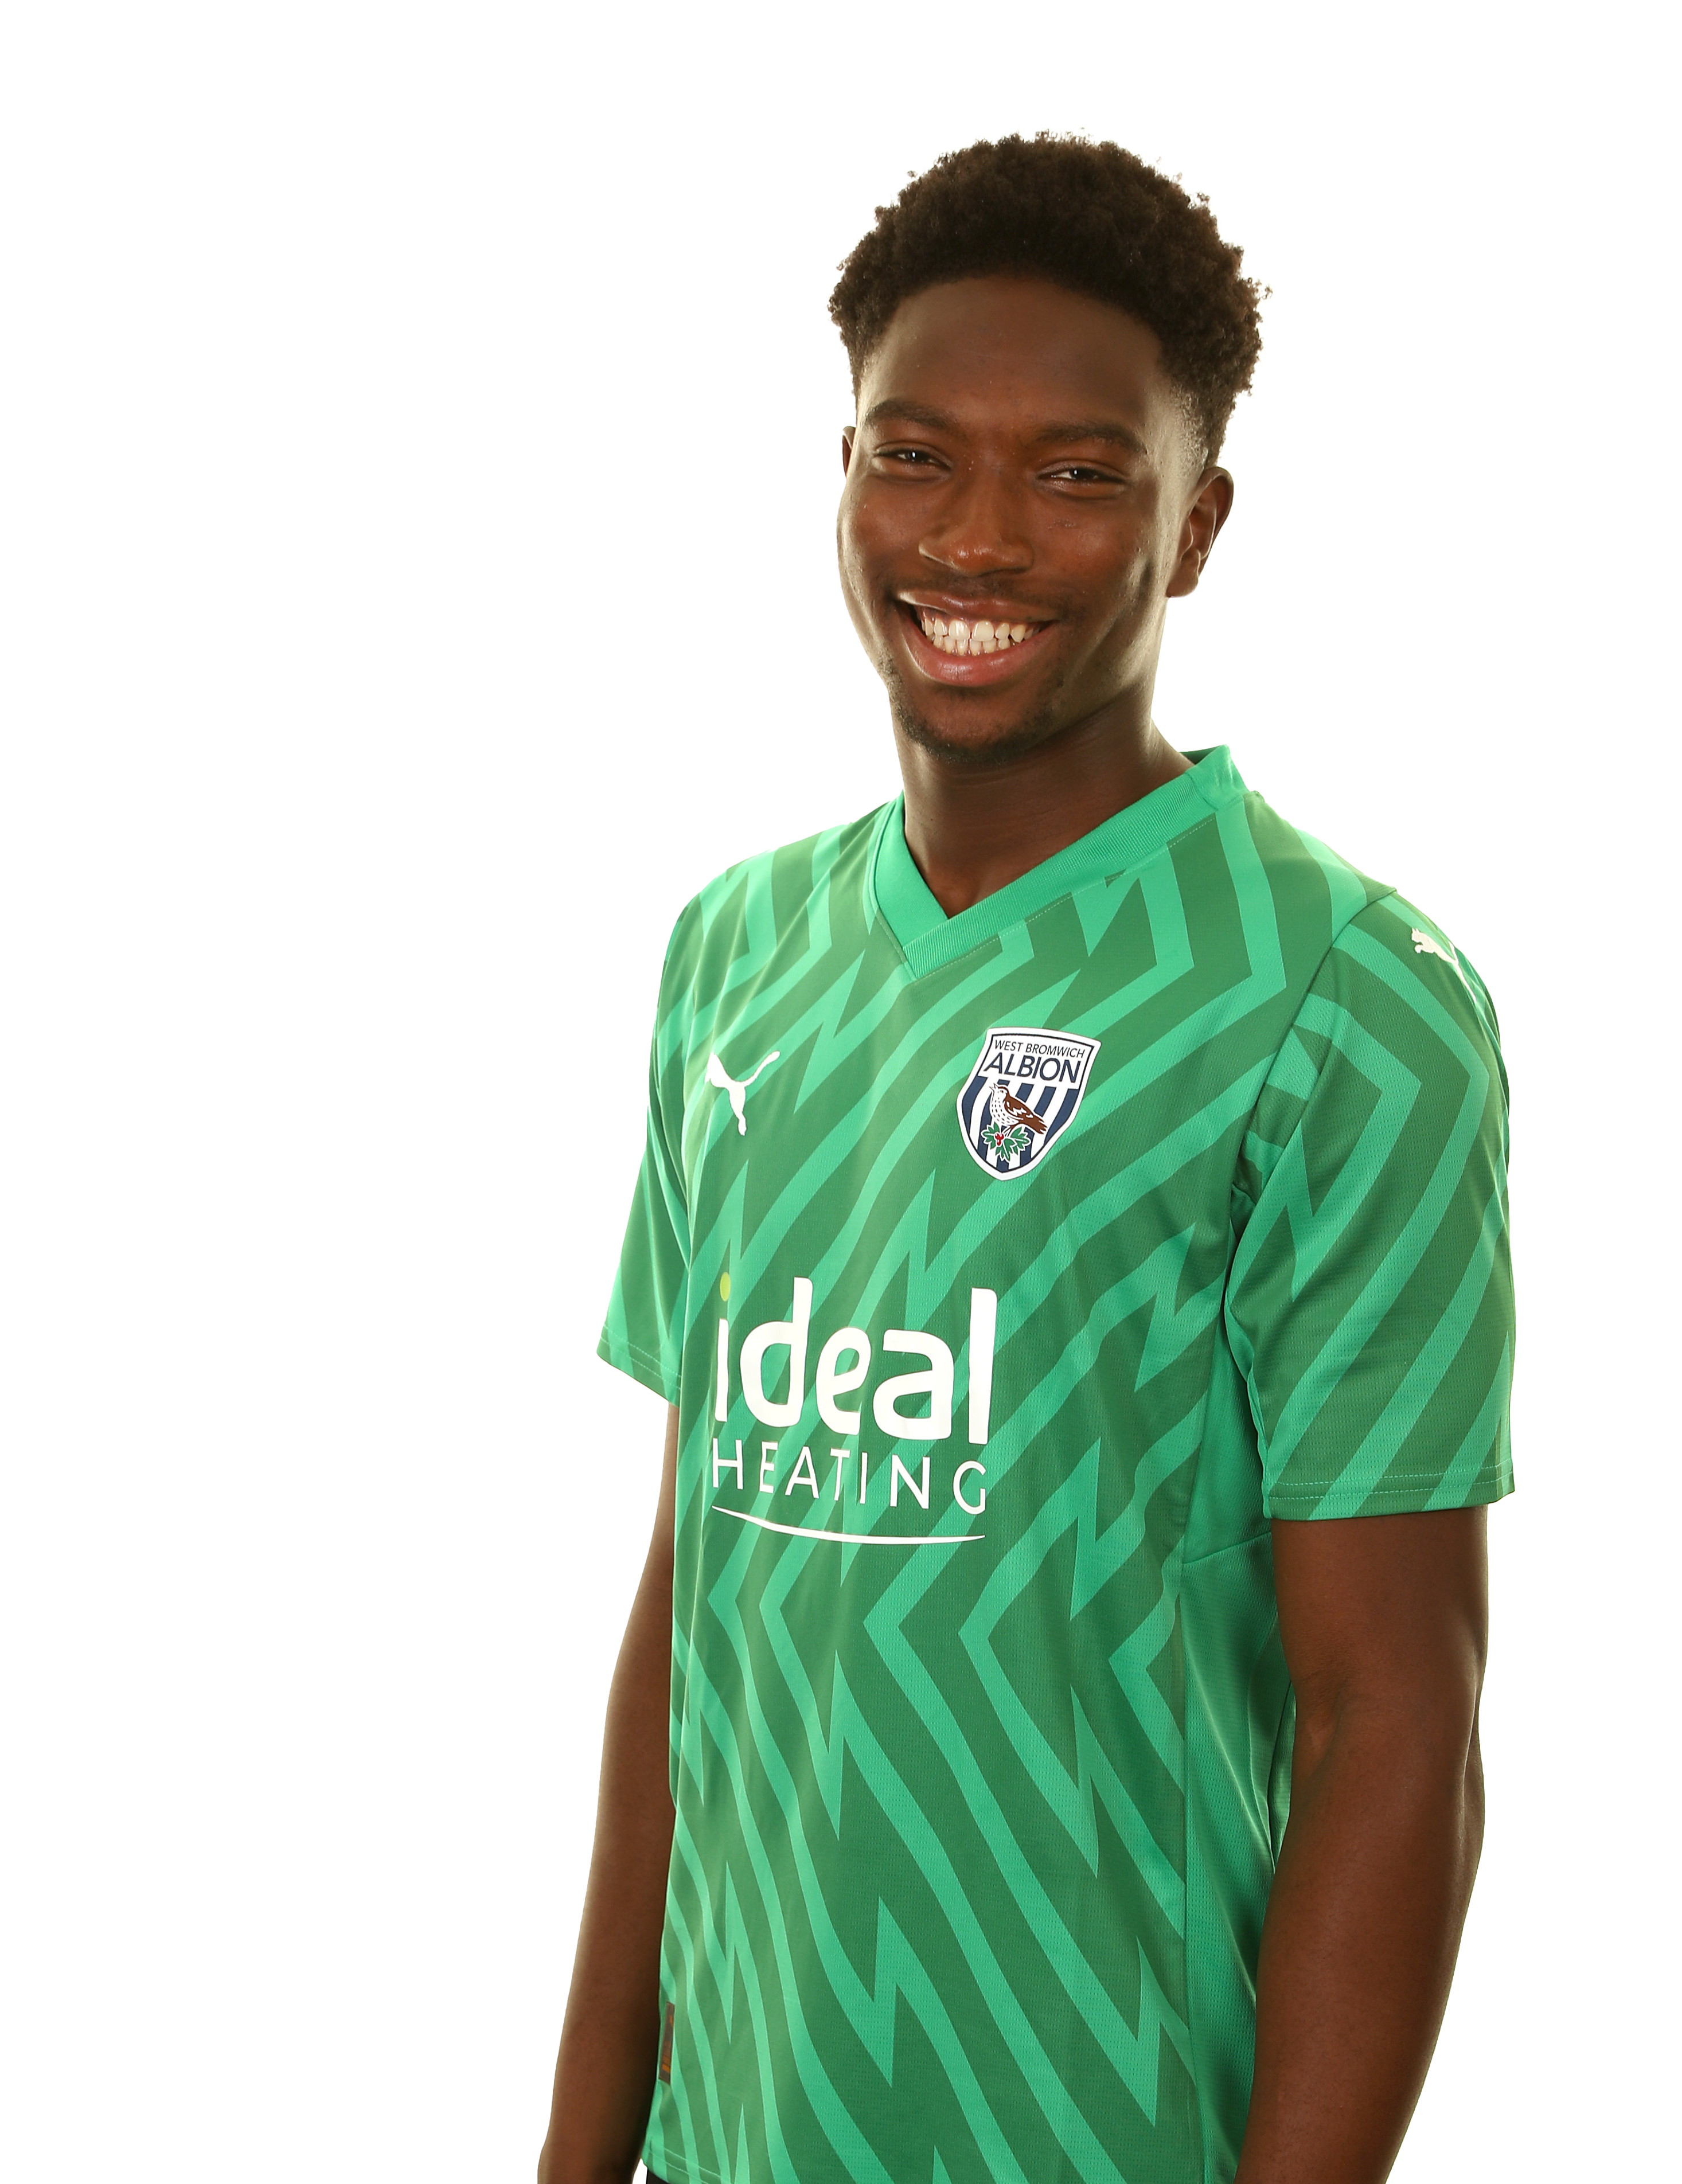 A photo headshot of Albion Under-18s player Ben Cisse ahead of the 2023/24 season